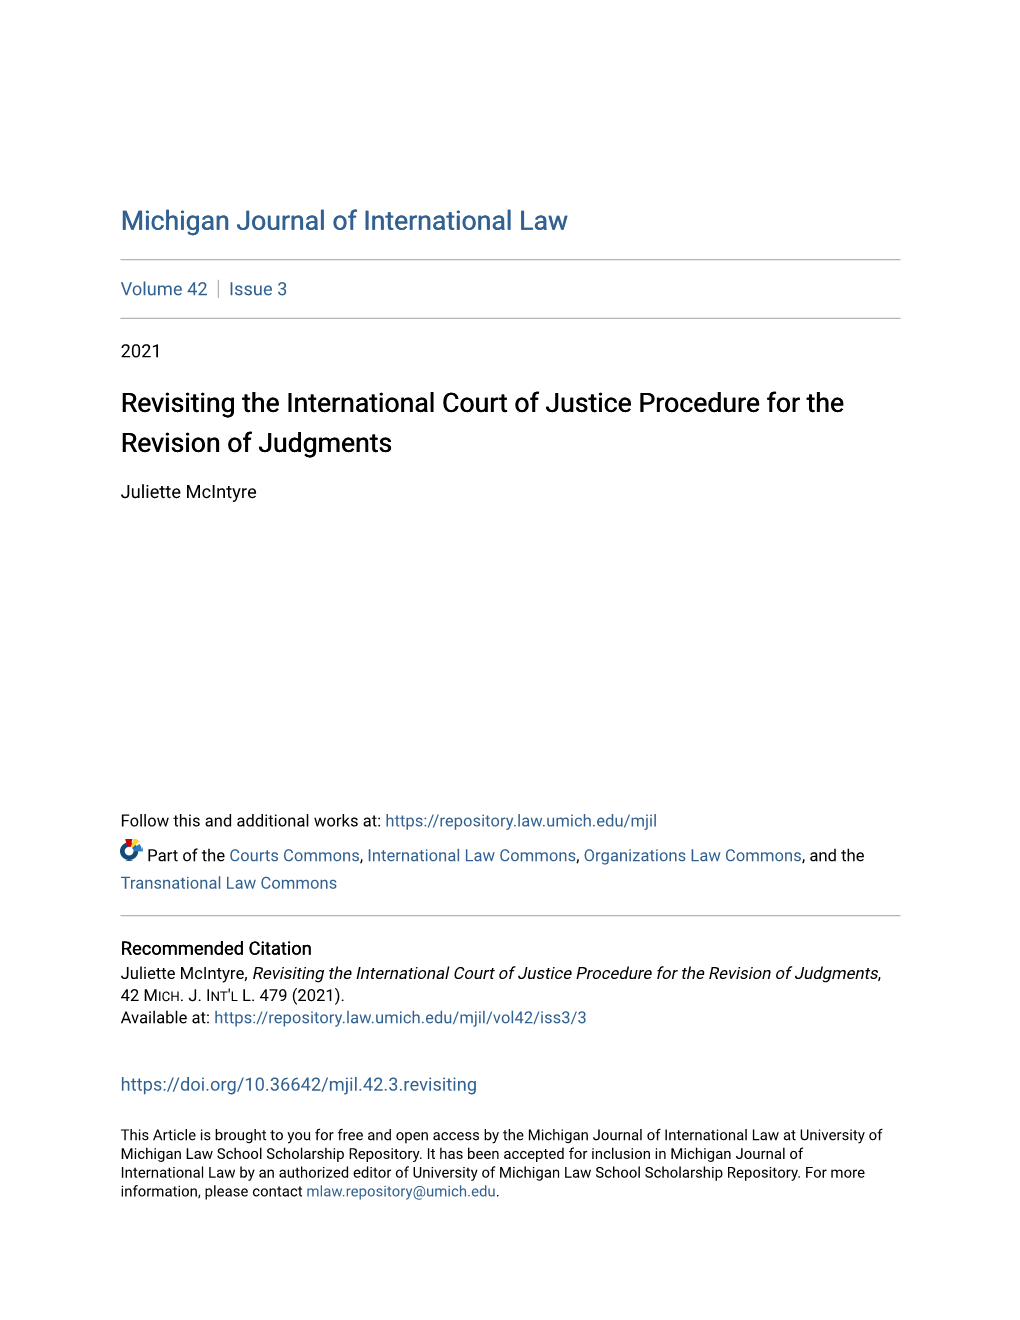 Revisiting the International Court of Justice Procedure for the Revision of Judgments